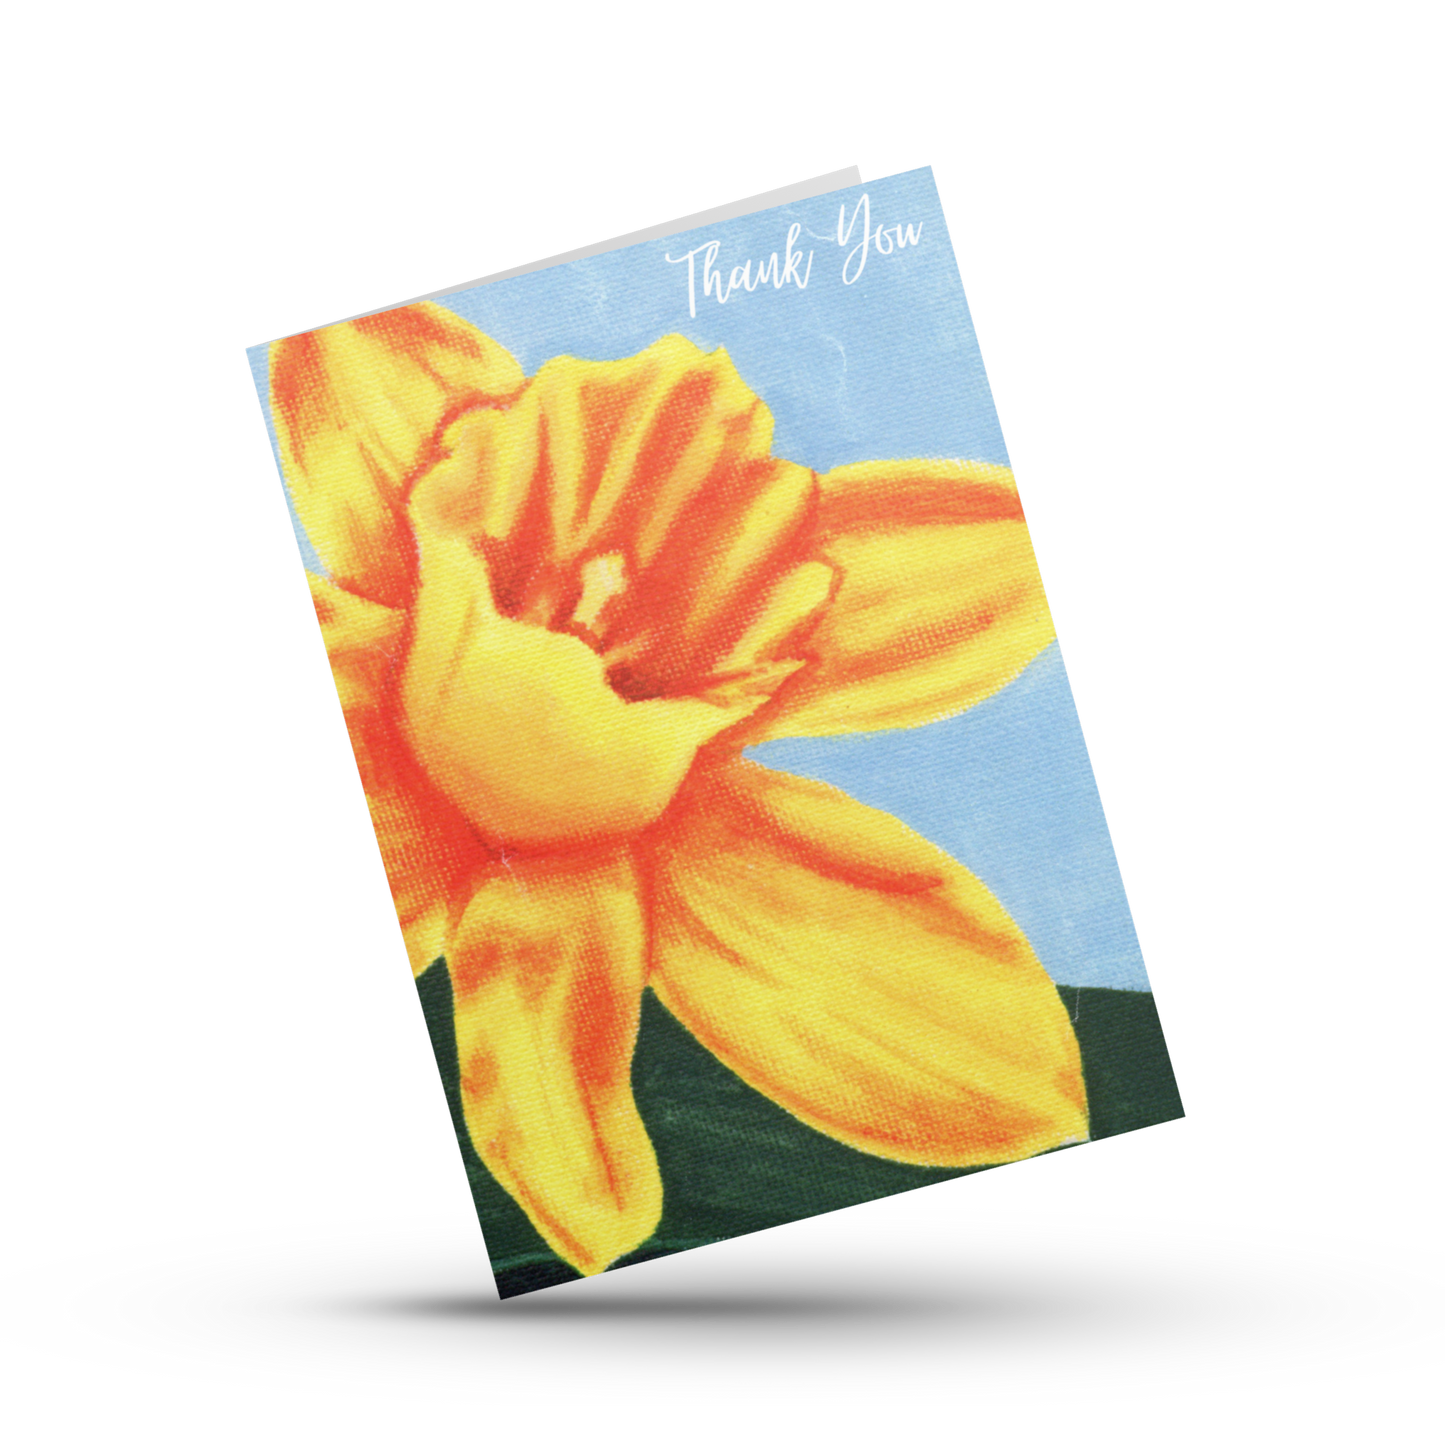 Daffodil thank you card, Flower card, Floral thank you card, Bridal baby shower thank you, Wedding thank you, Card for friend, Aunt, Mom